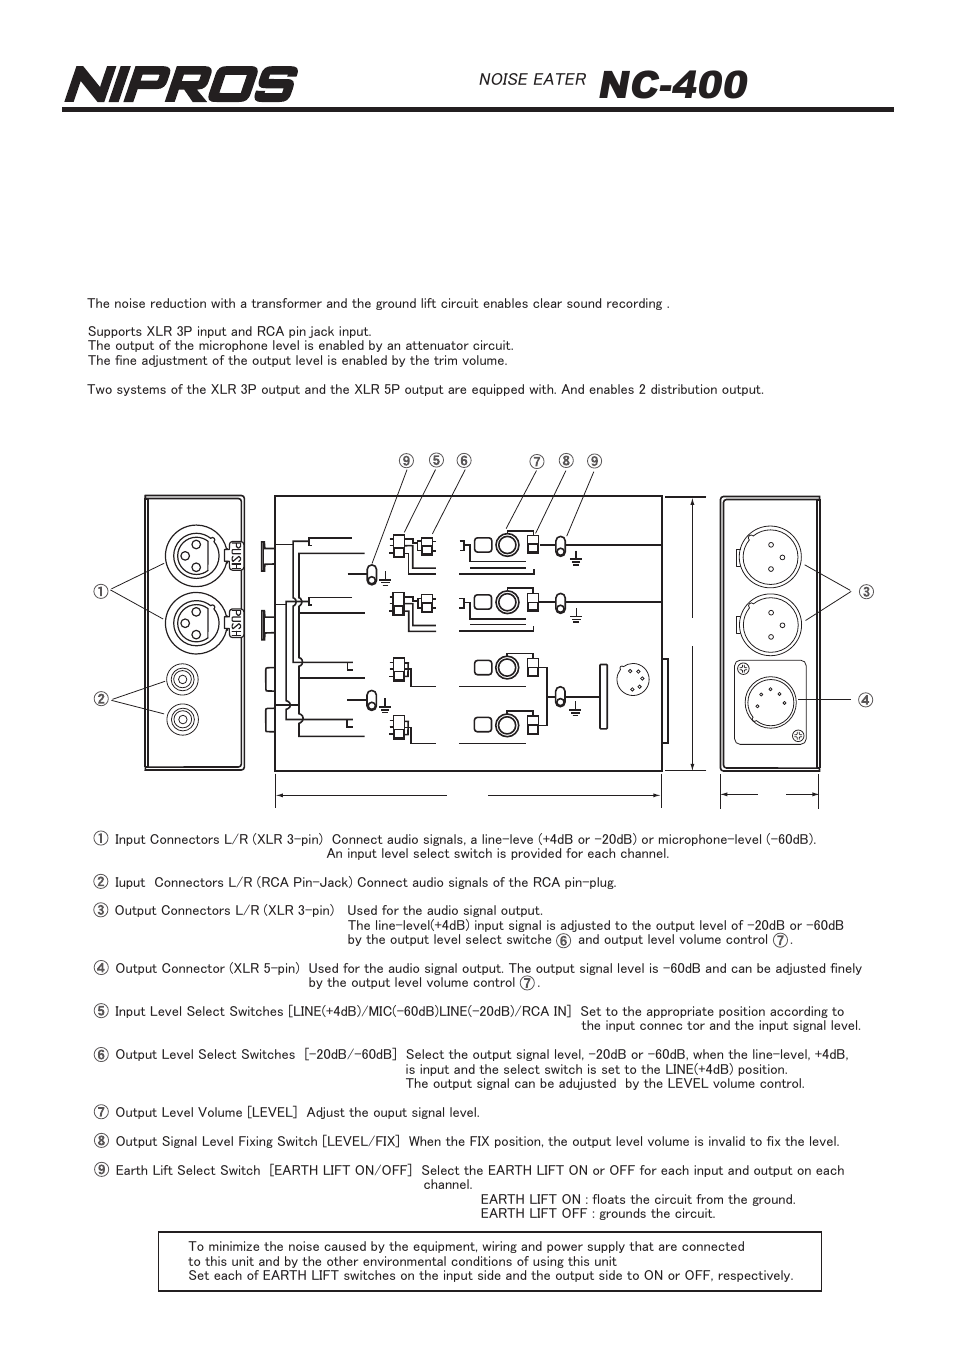 Nipros NC-400 User Manual | 2 pages